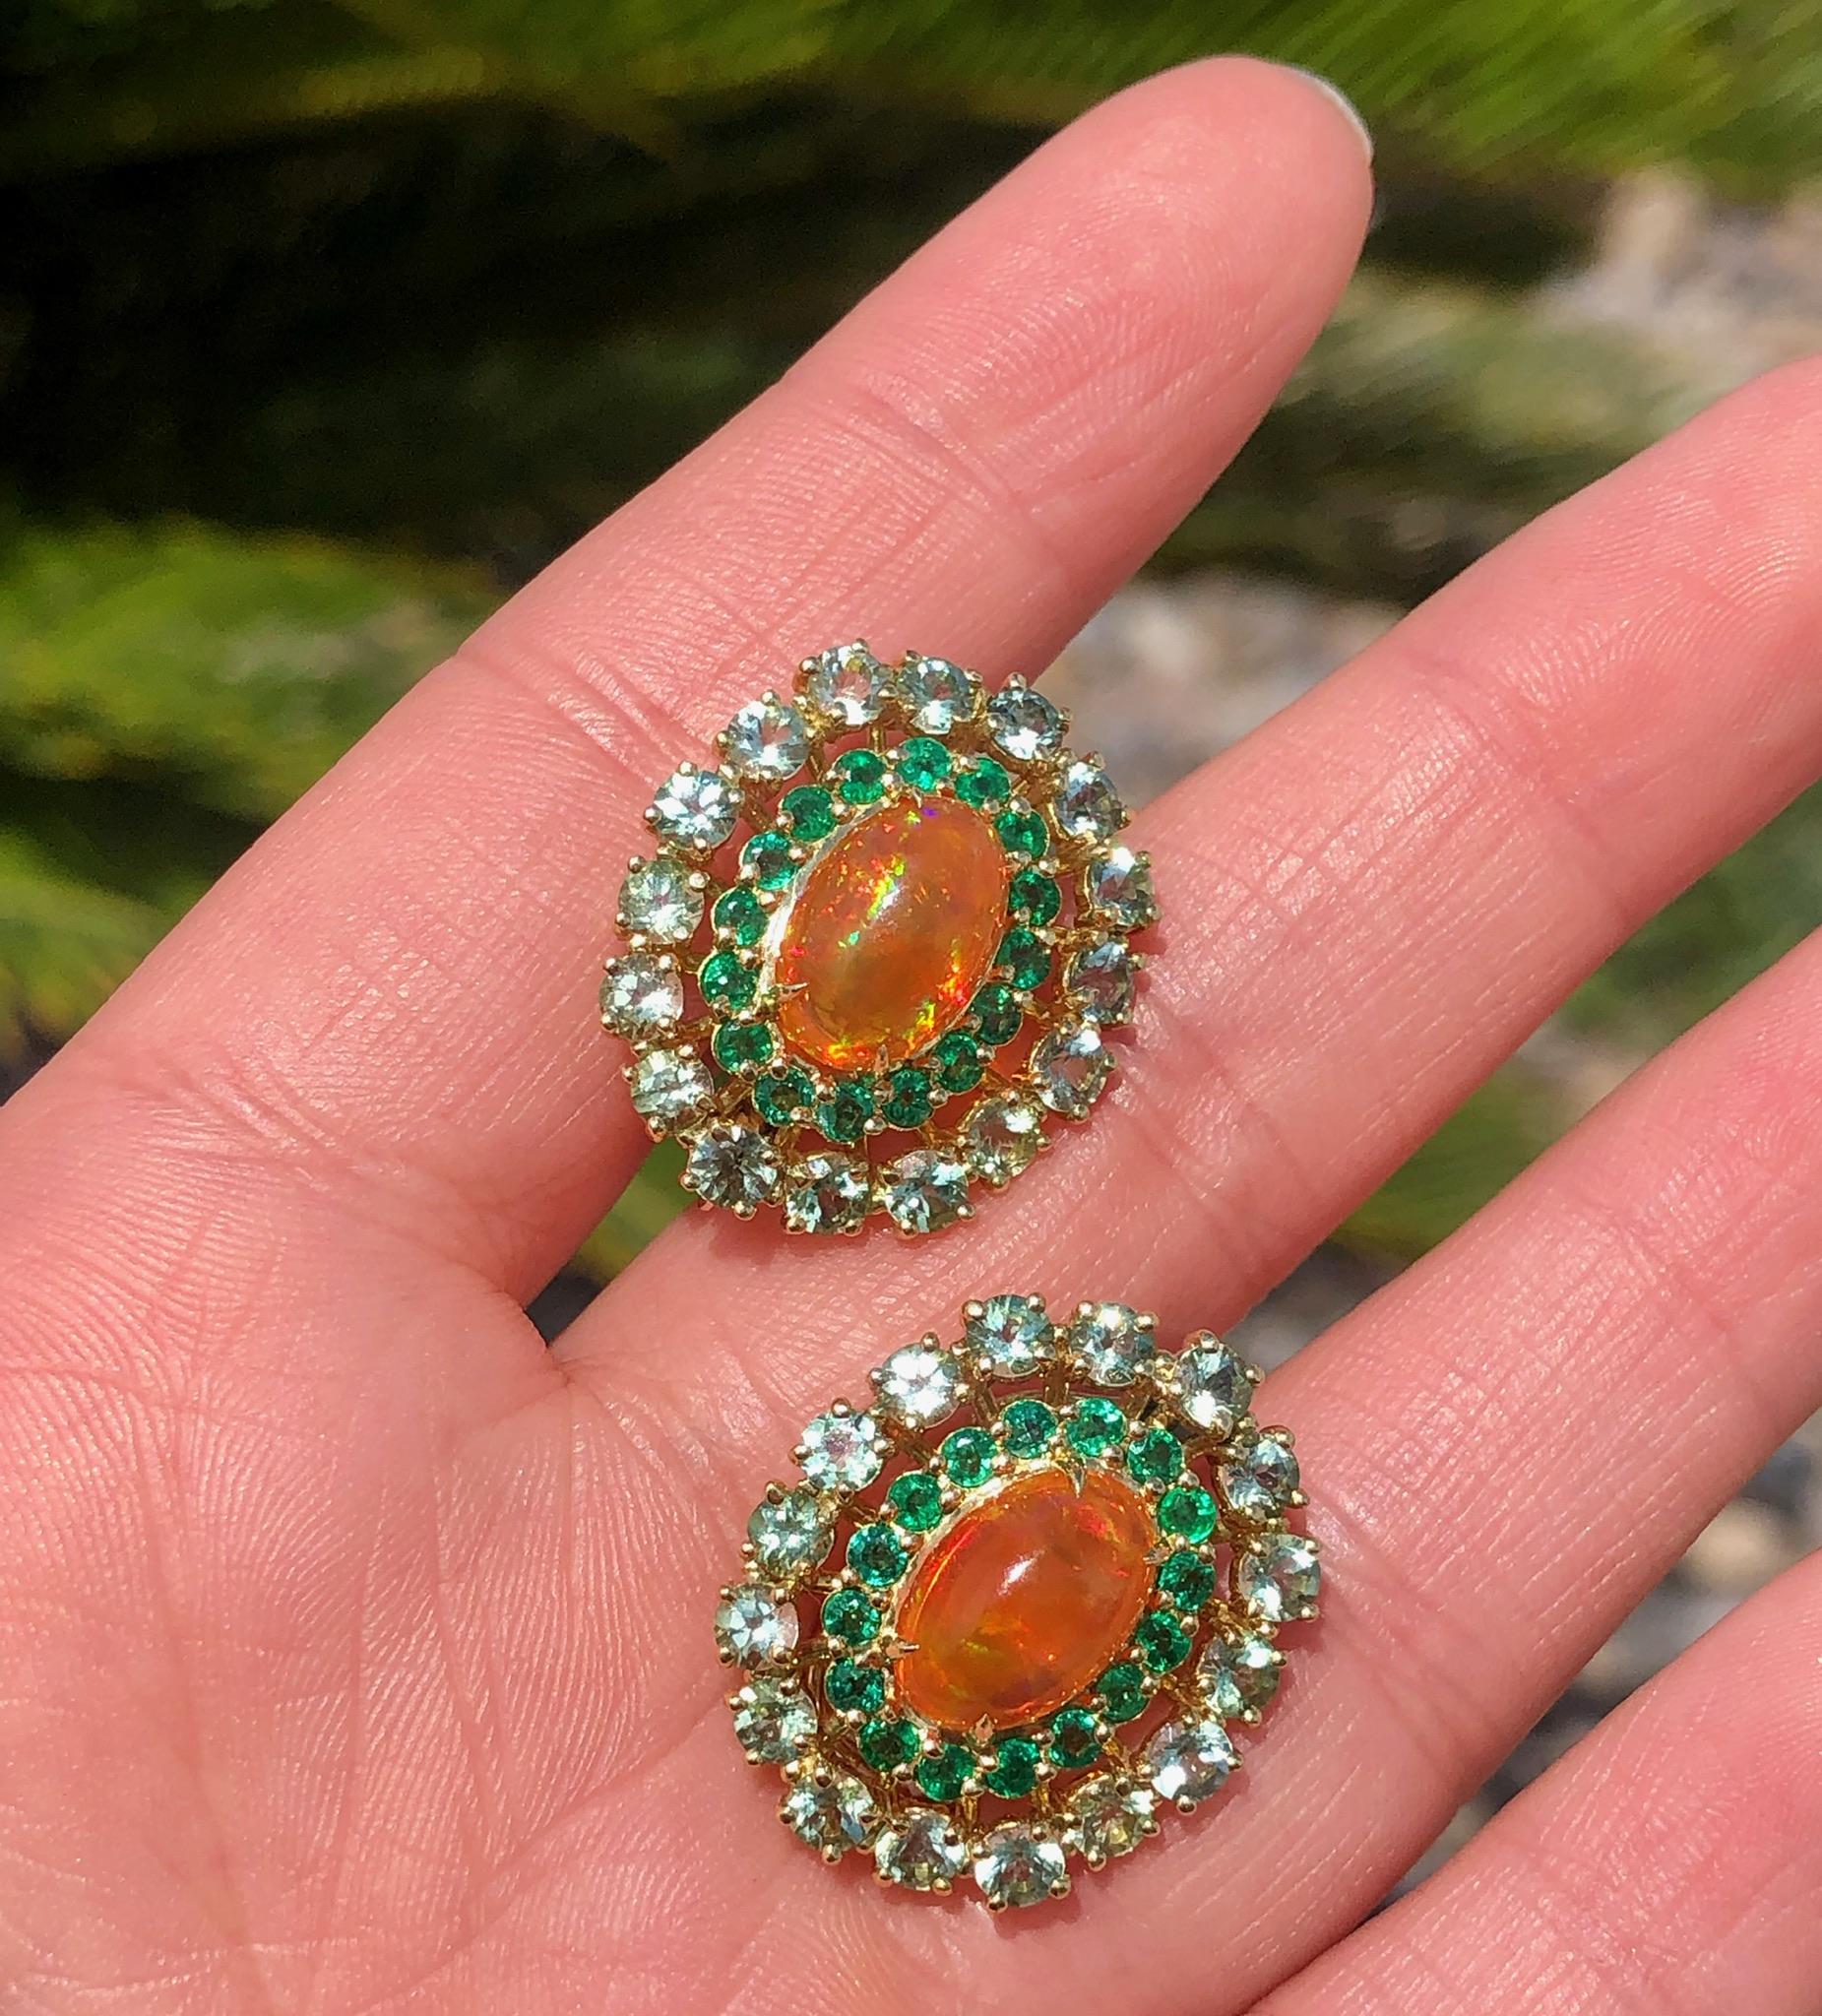 Very Fine 4.31 ctw Cabochon Mexican Fire Opals with amazing play-of-color. The exquisite stones are surrounded by 1.28 carats of round Colombian emeralds and 3.84 carats of Green Tourmalines and set in 18K Yellow Gold. The color combinations